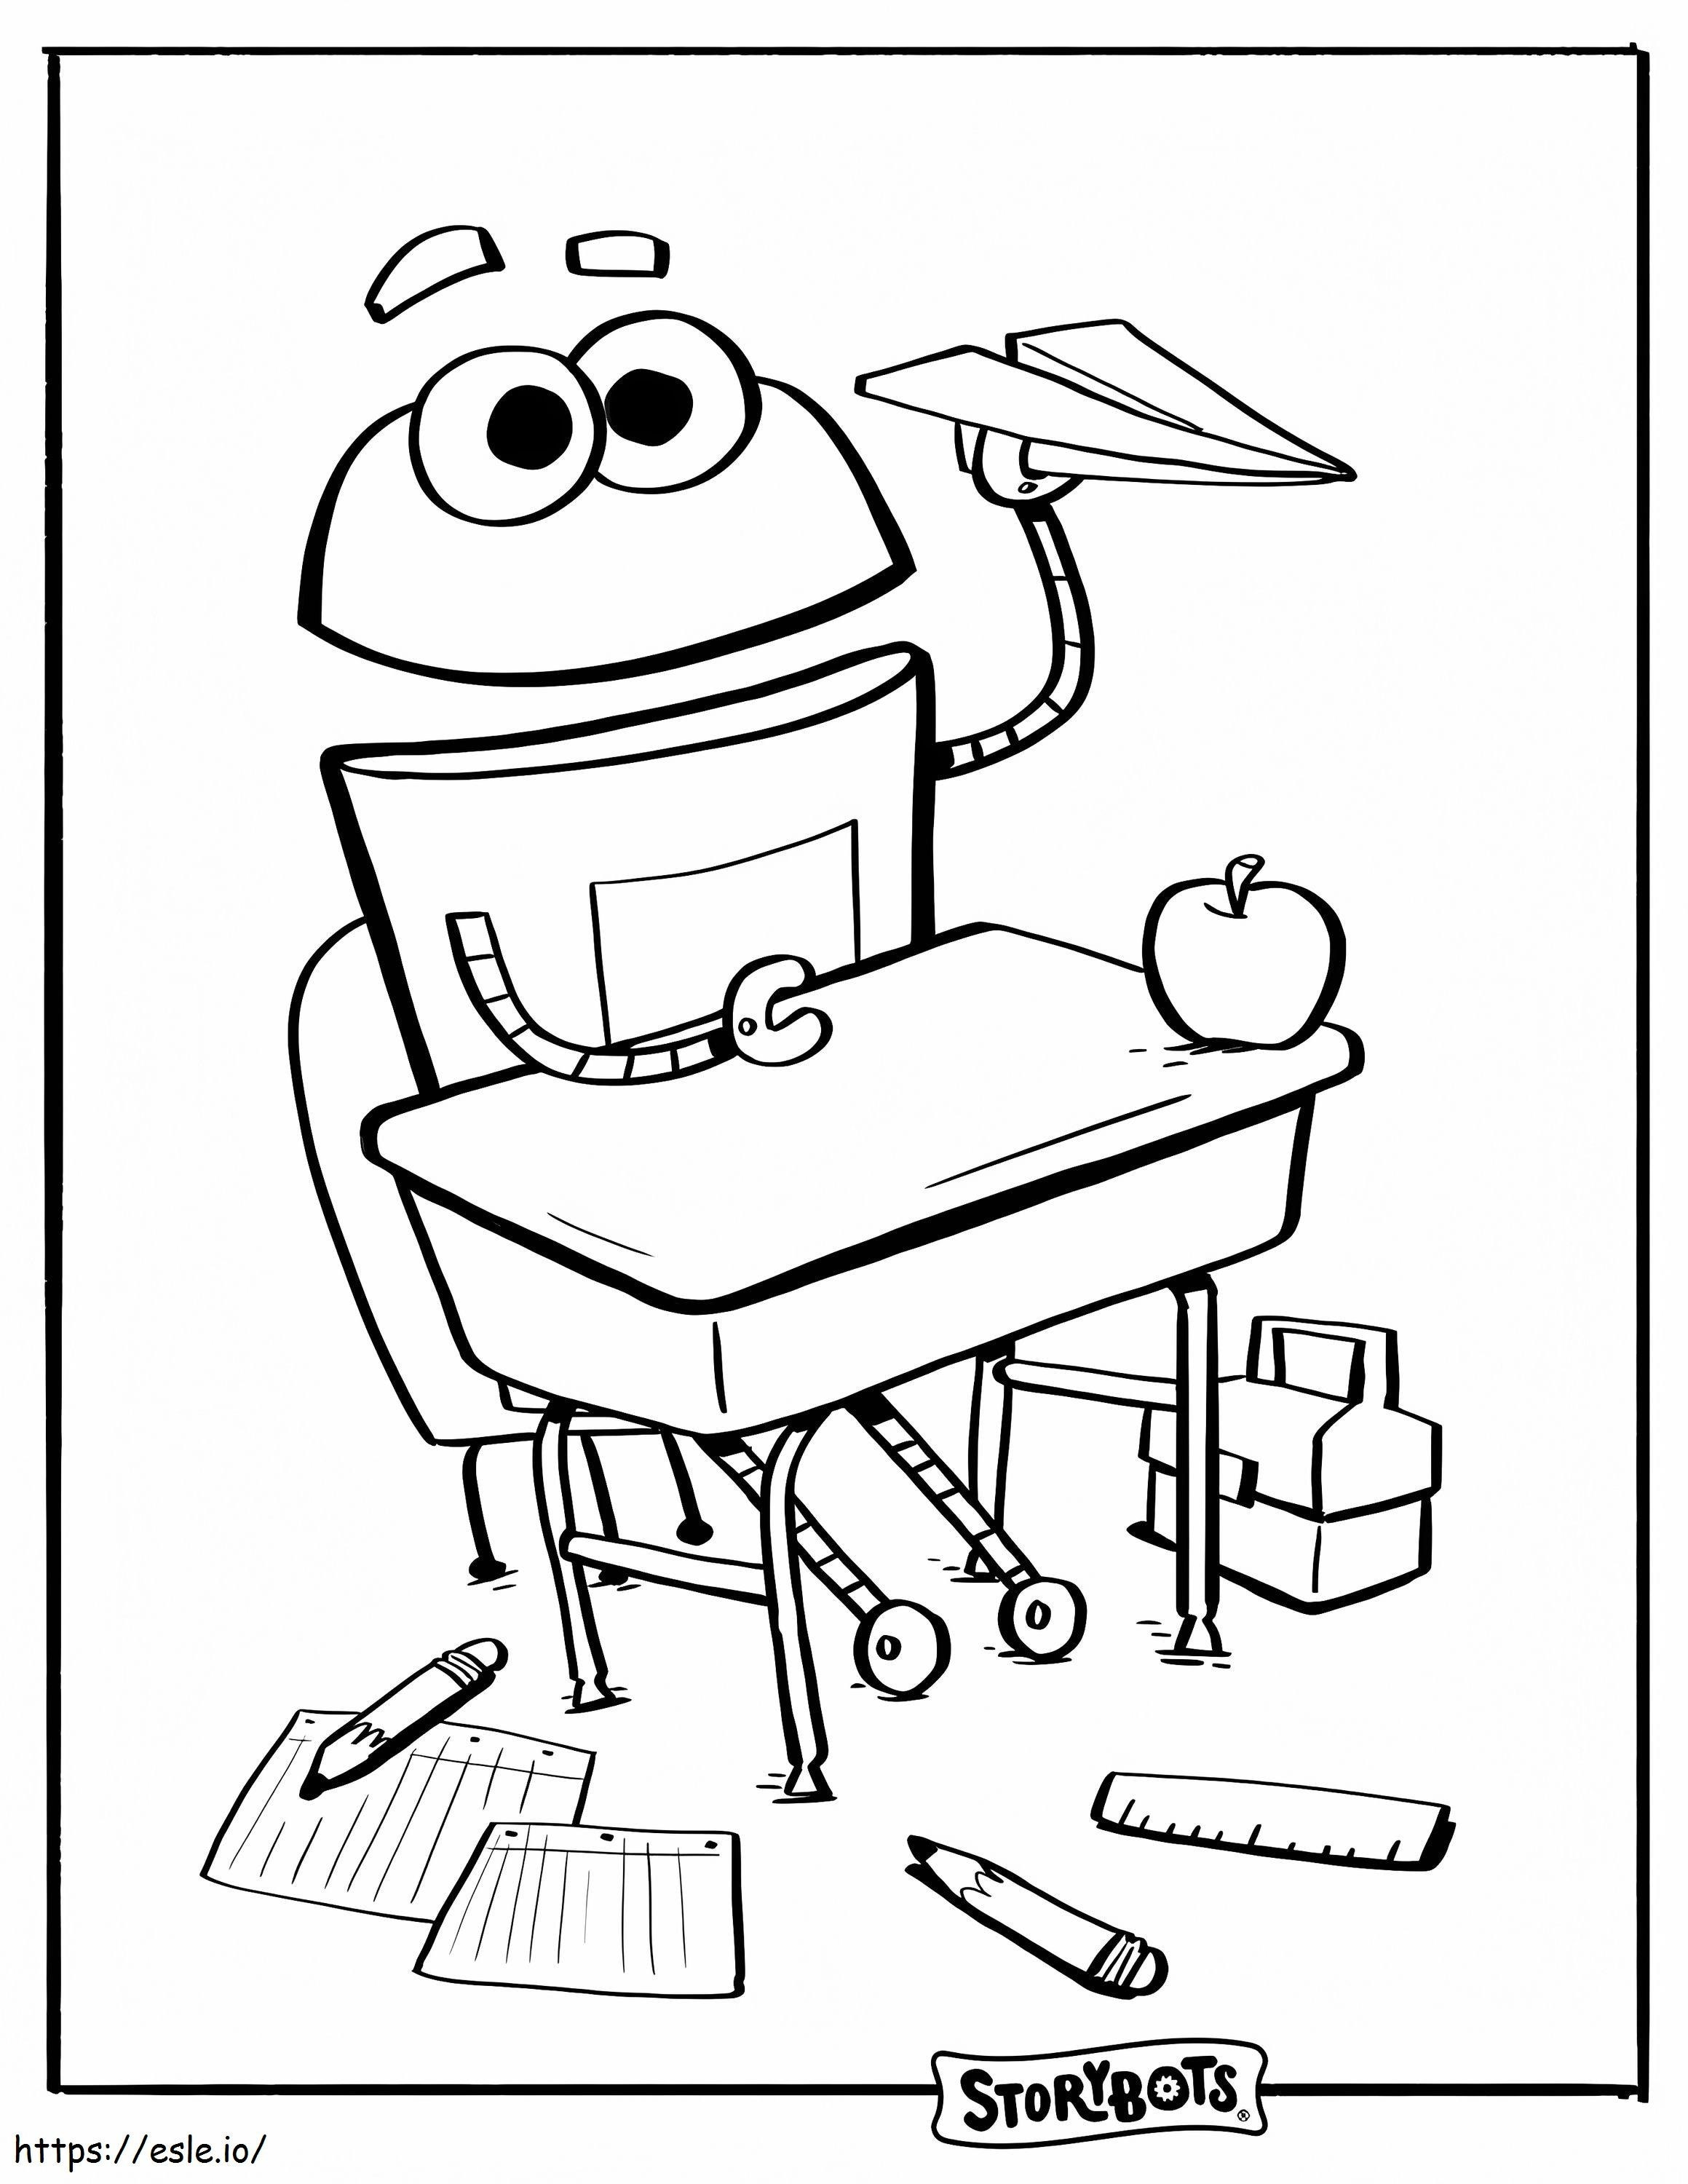 1581388921 B648Dcd coloring page